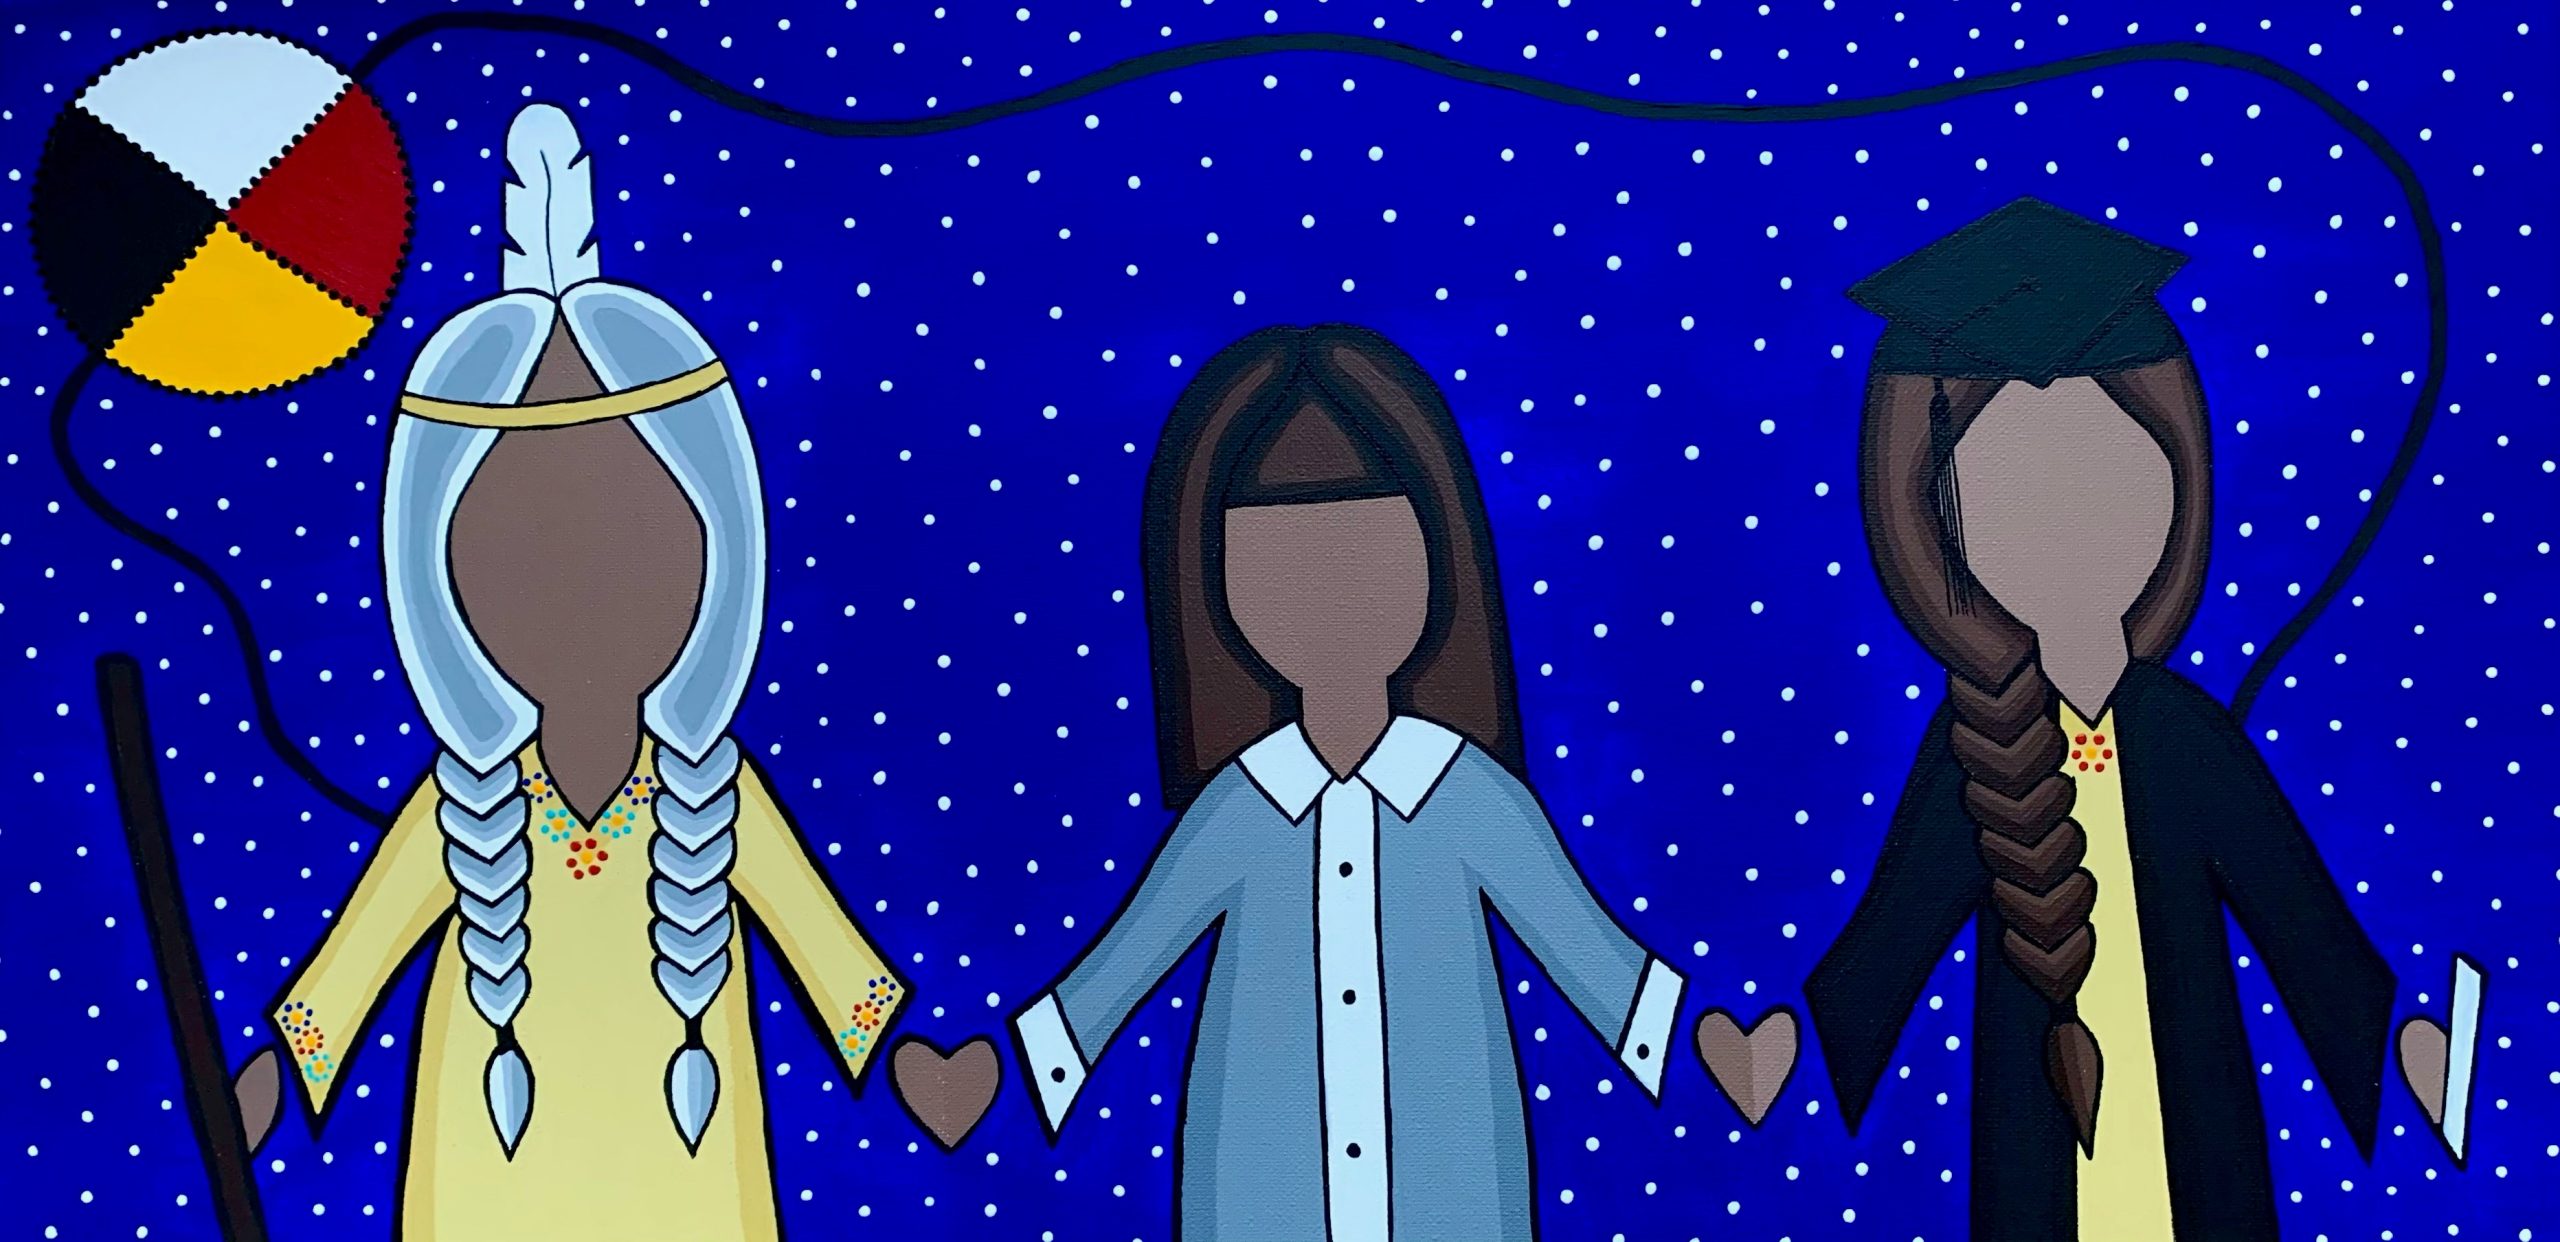 Stylized painting of three First Nations women. One is an elder, one is a child, and one is a graduate.